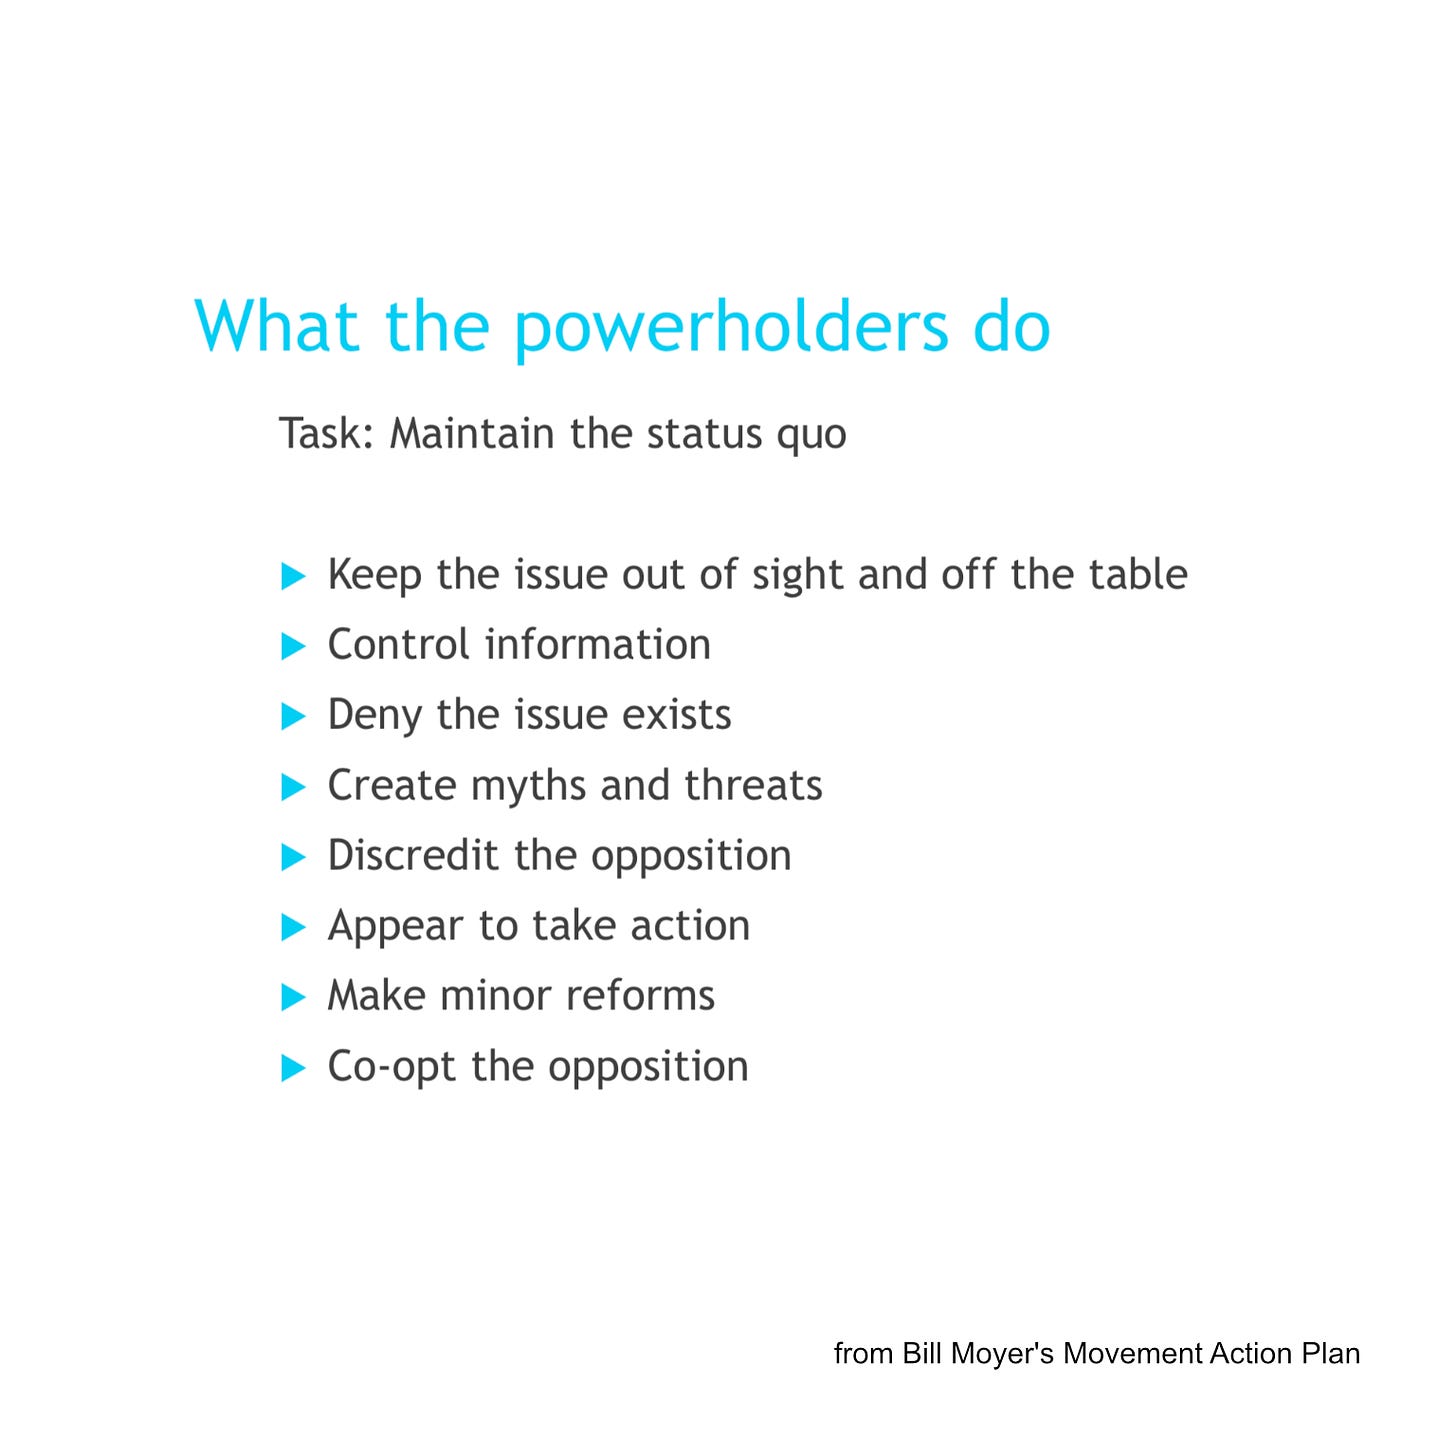 What the powerholders do. Task: Maintain the status quo. Keep the issue out of sight and off the table. Control information. Deny the issue exists. Create myths and threats. Discredit the opposition. Appear to take action. Make minor reforms. Co-opt the opposition. From Bill Moyer’s Movement Action Plan. 